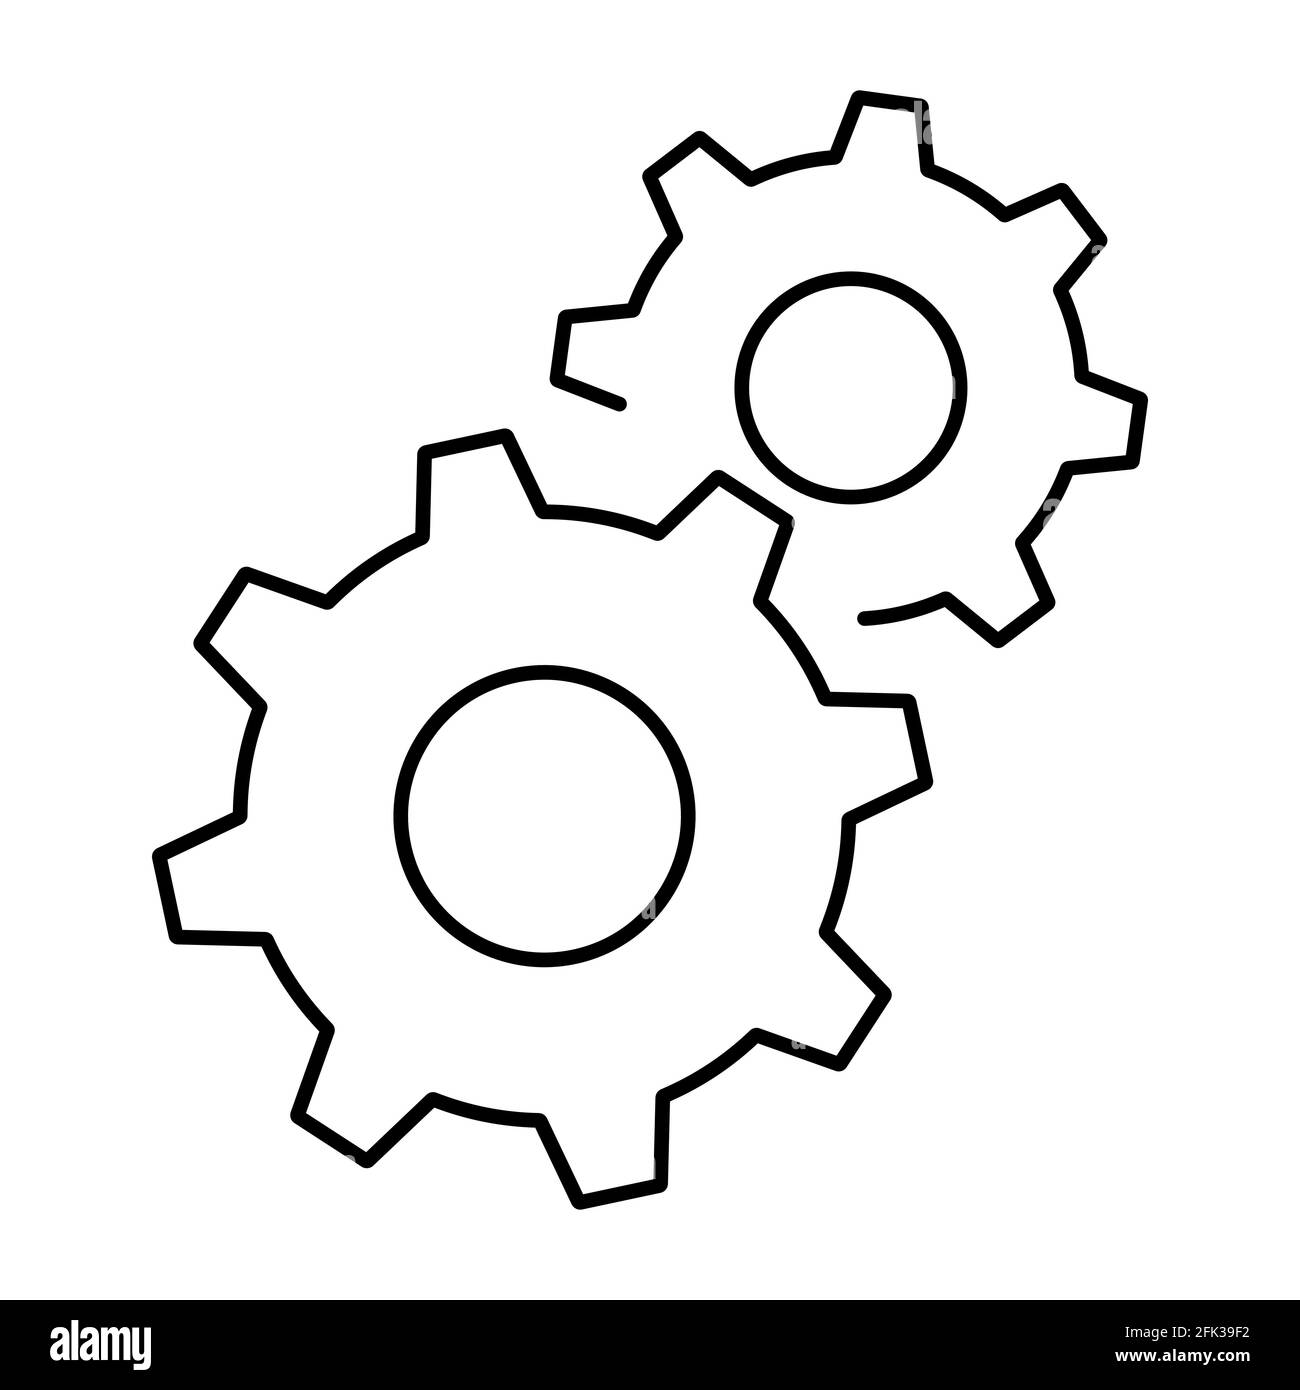 Gear outline icon of two cogwheels. Vector gear symbol isolated on